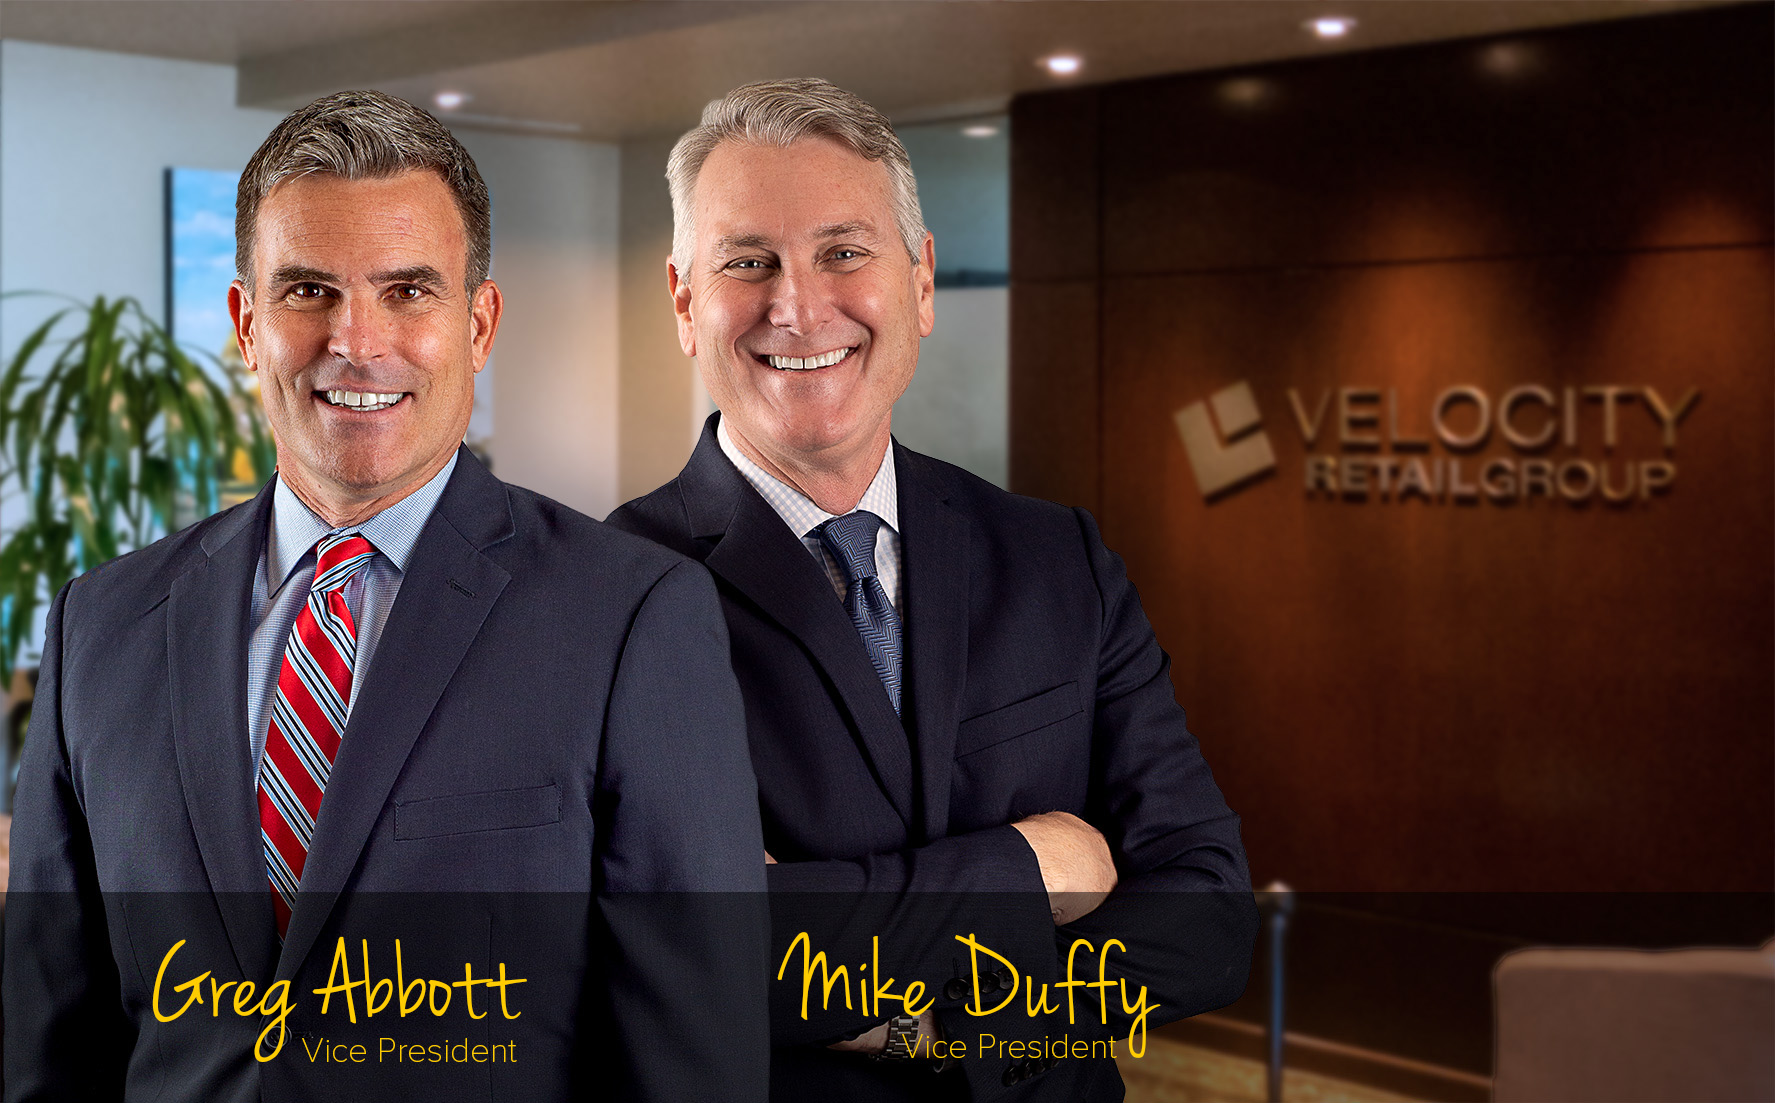 Experienced Investment Team Joins Velocity Retail Group 2